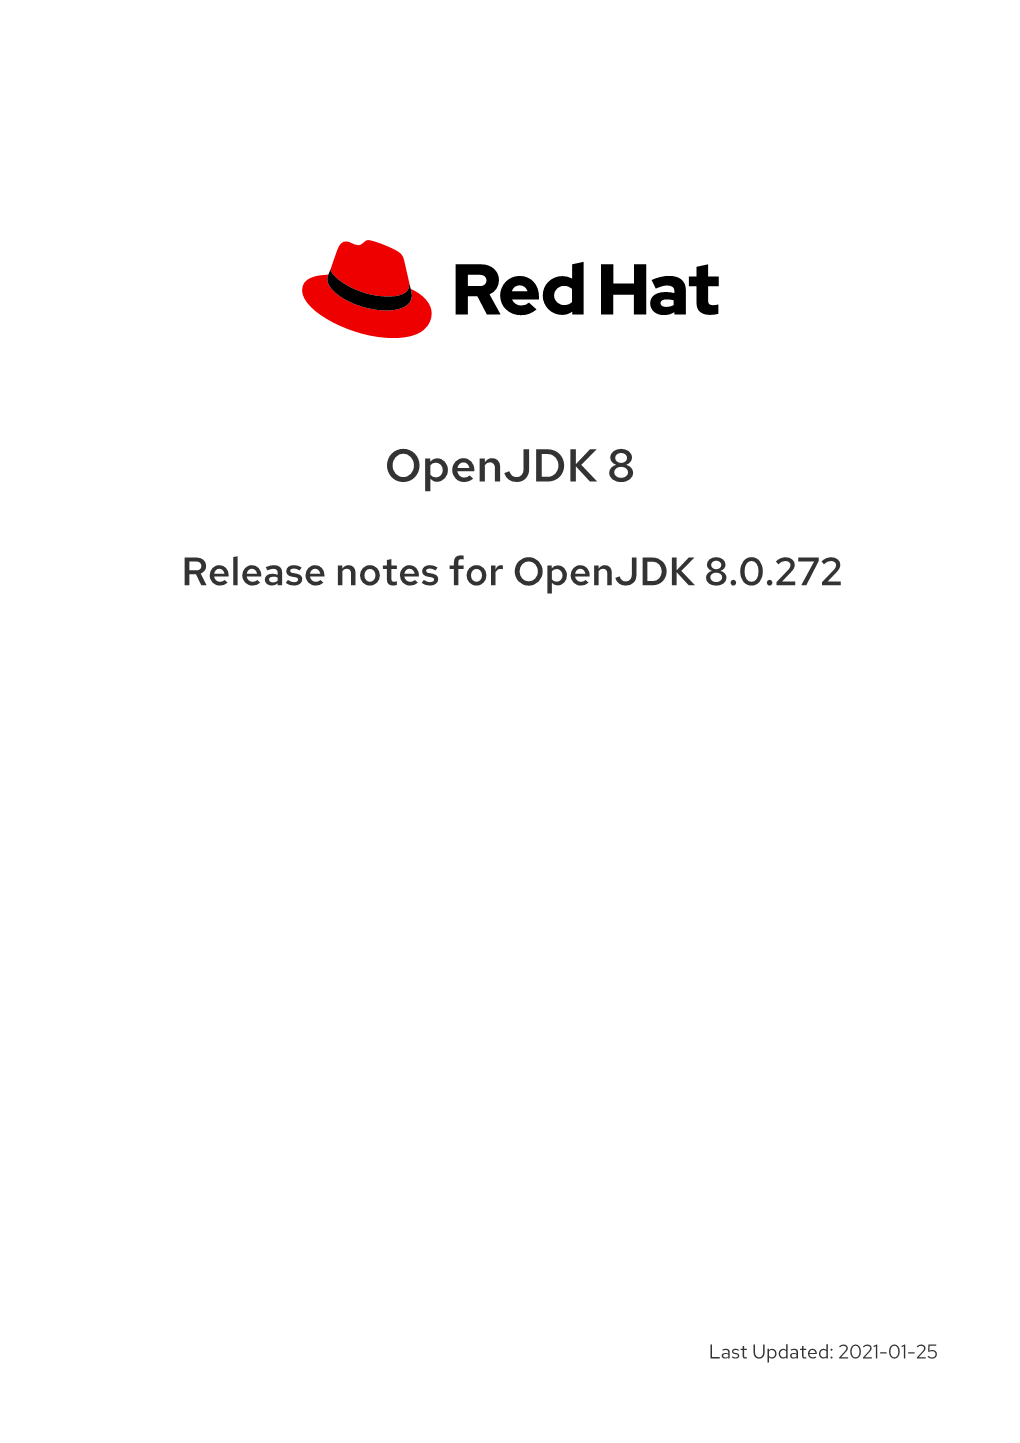 Release Notes for Openjdk 8.0.272